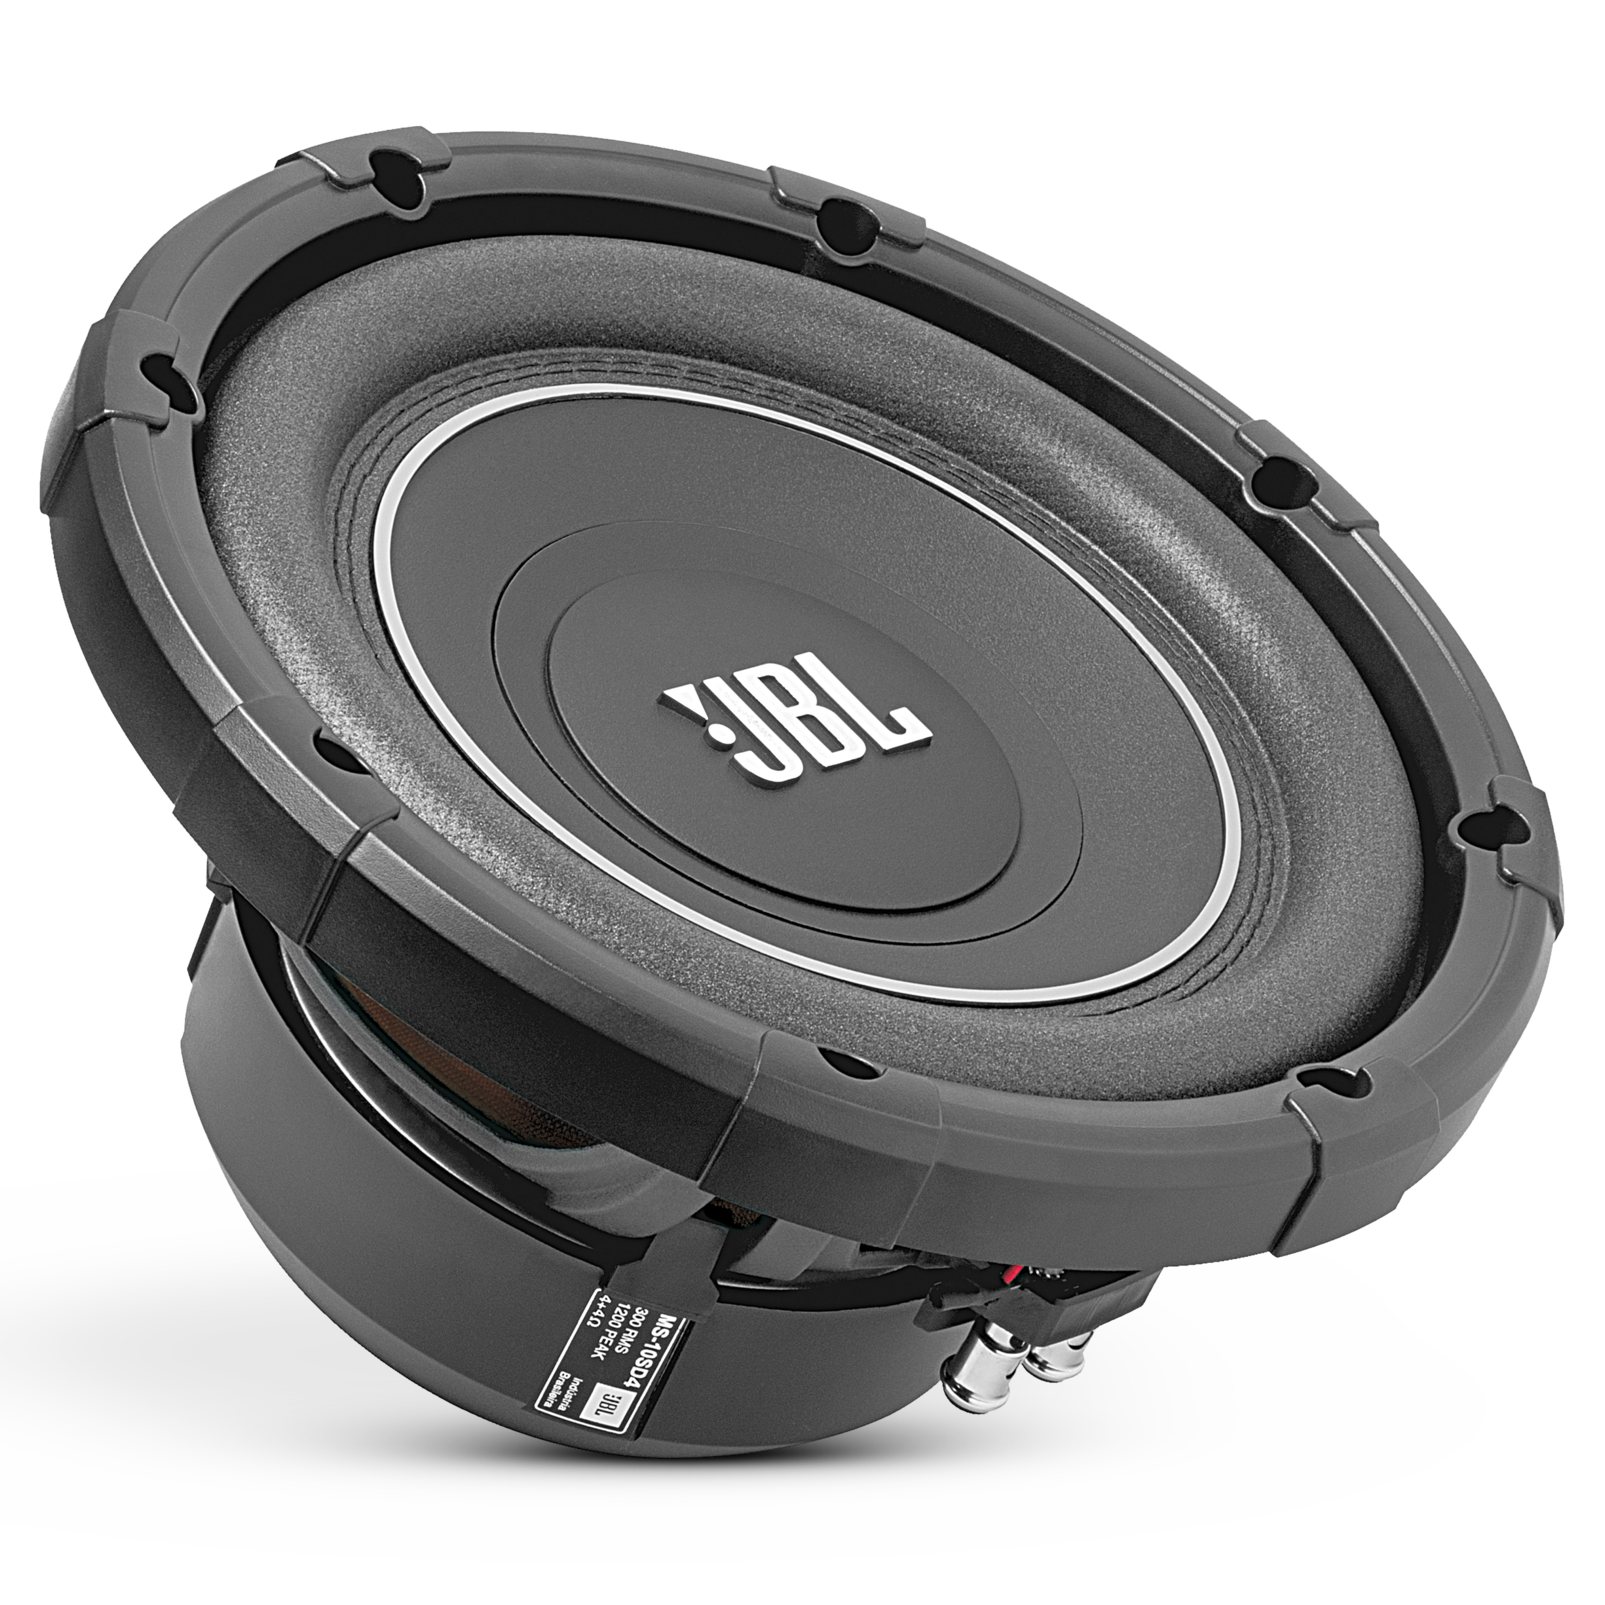 MS-10SD4 SLIM An advanced-design, shallow-mount, dual voice-coil subwoofer delivering phenomenal bass in a small space